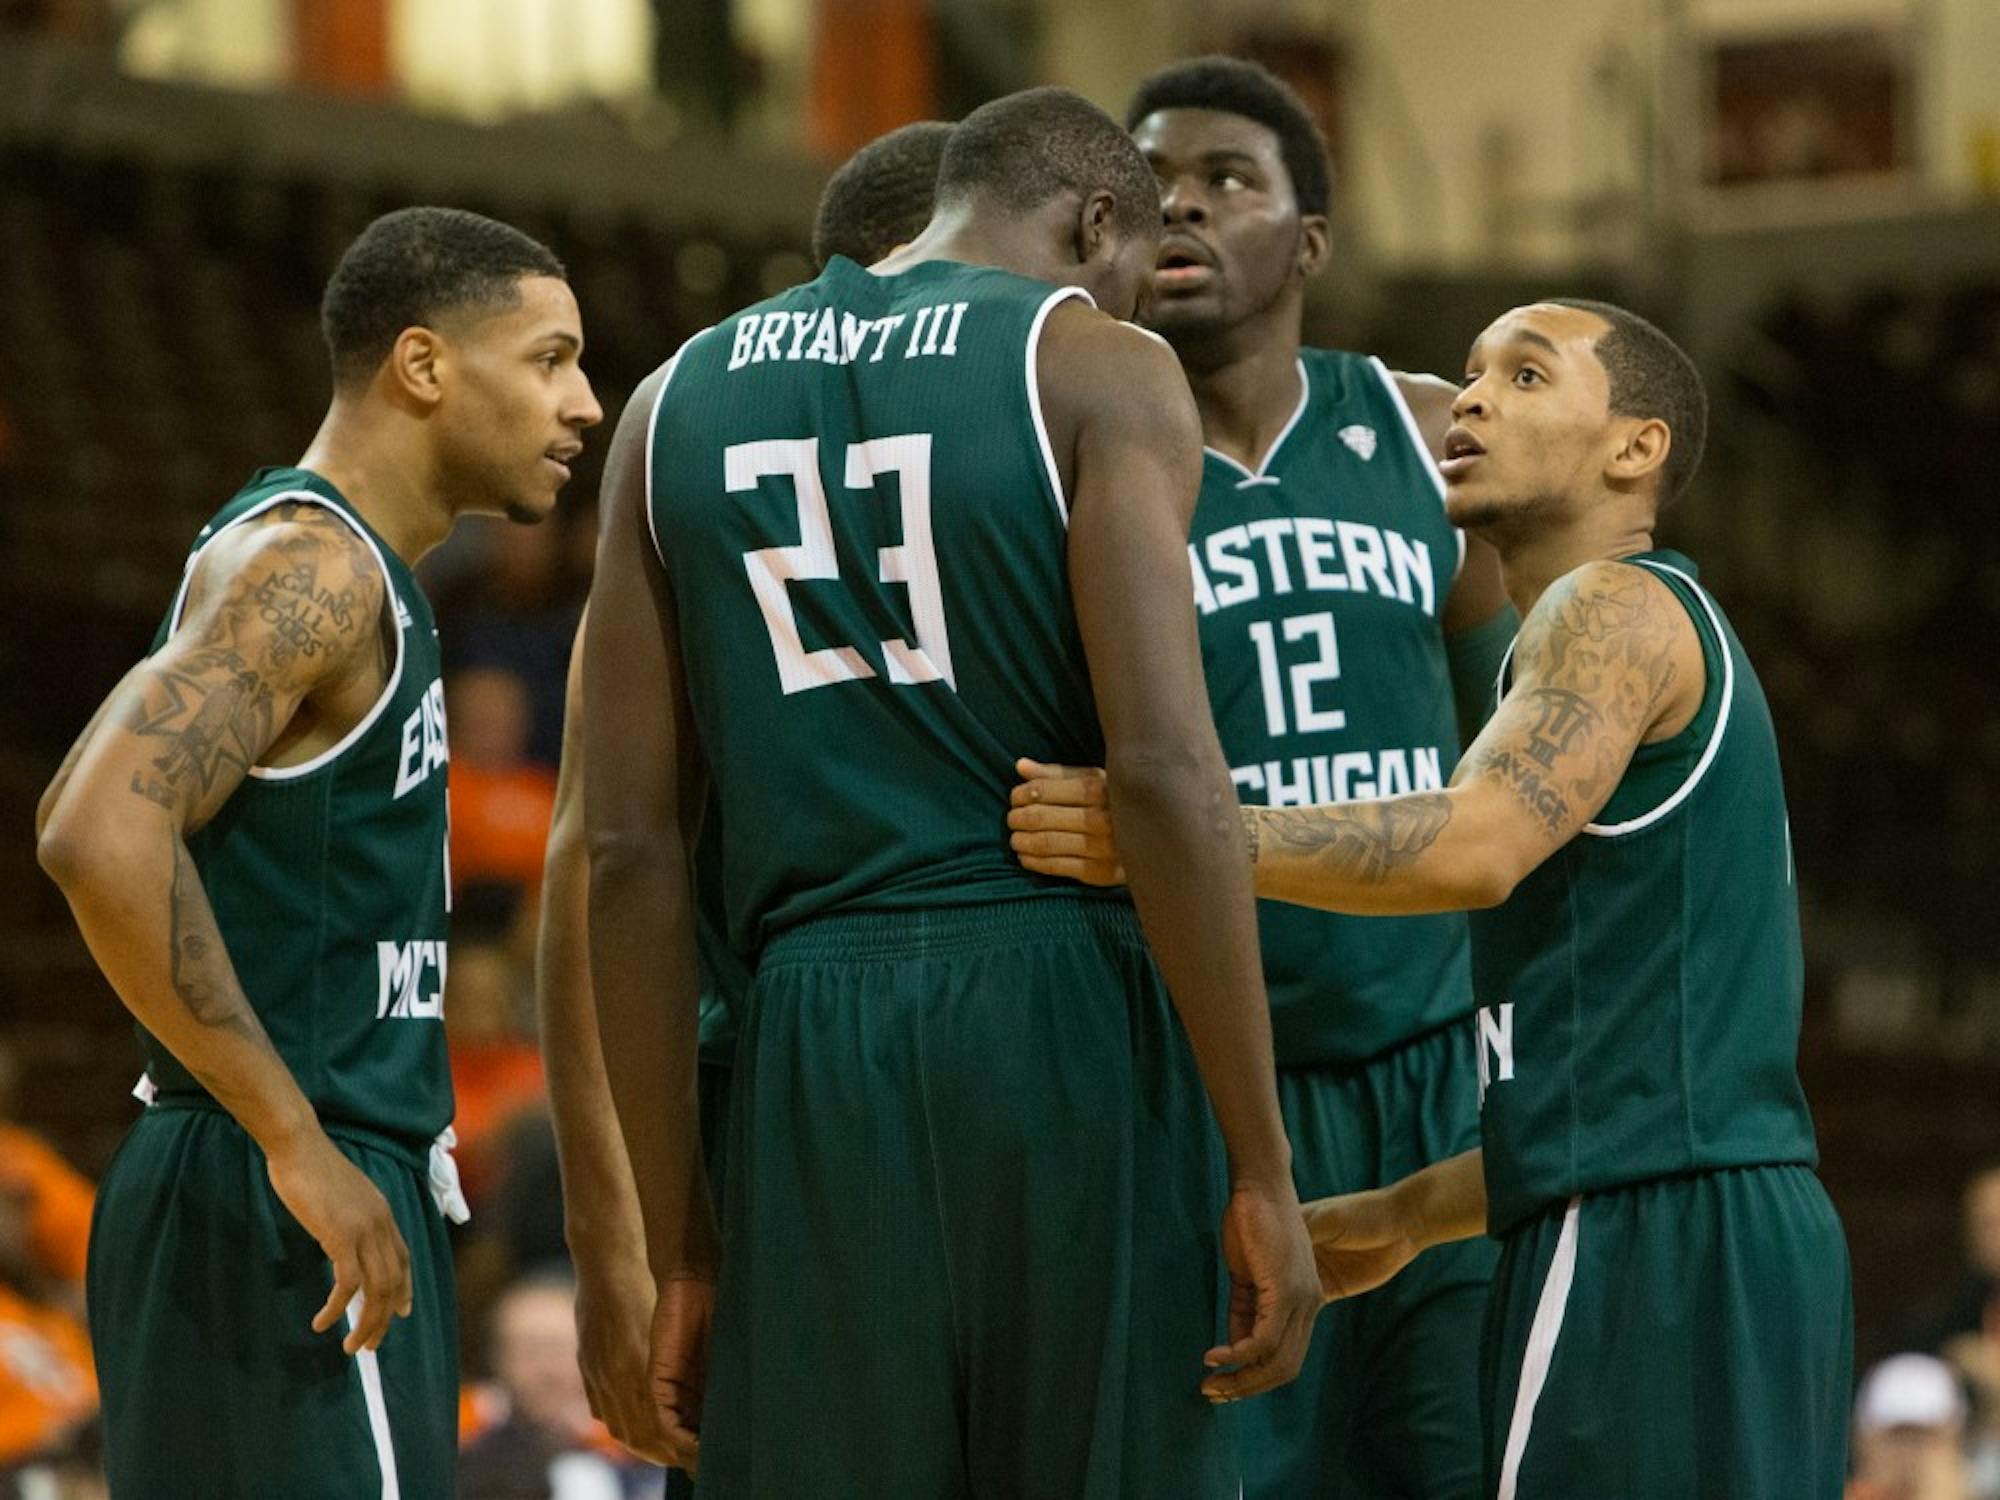 The team talks quick before a free throw attempt in Eastern Michigan's 56-51 win over Bowling Green Wednesday night.